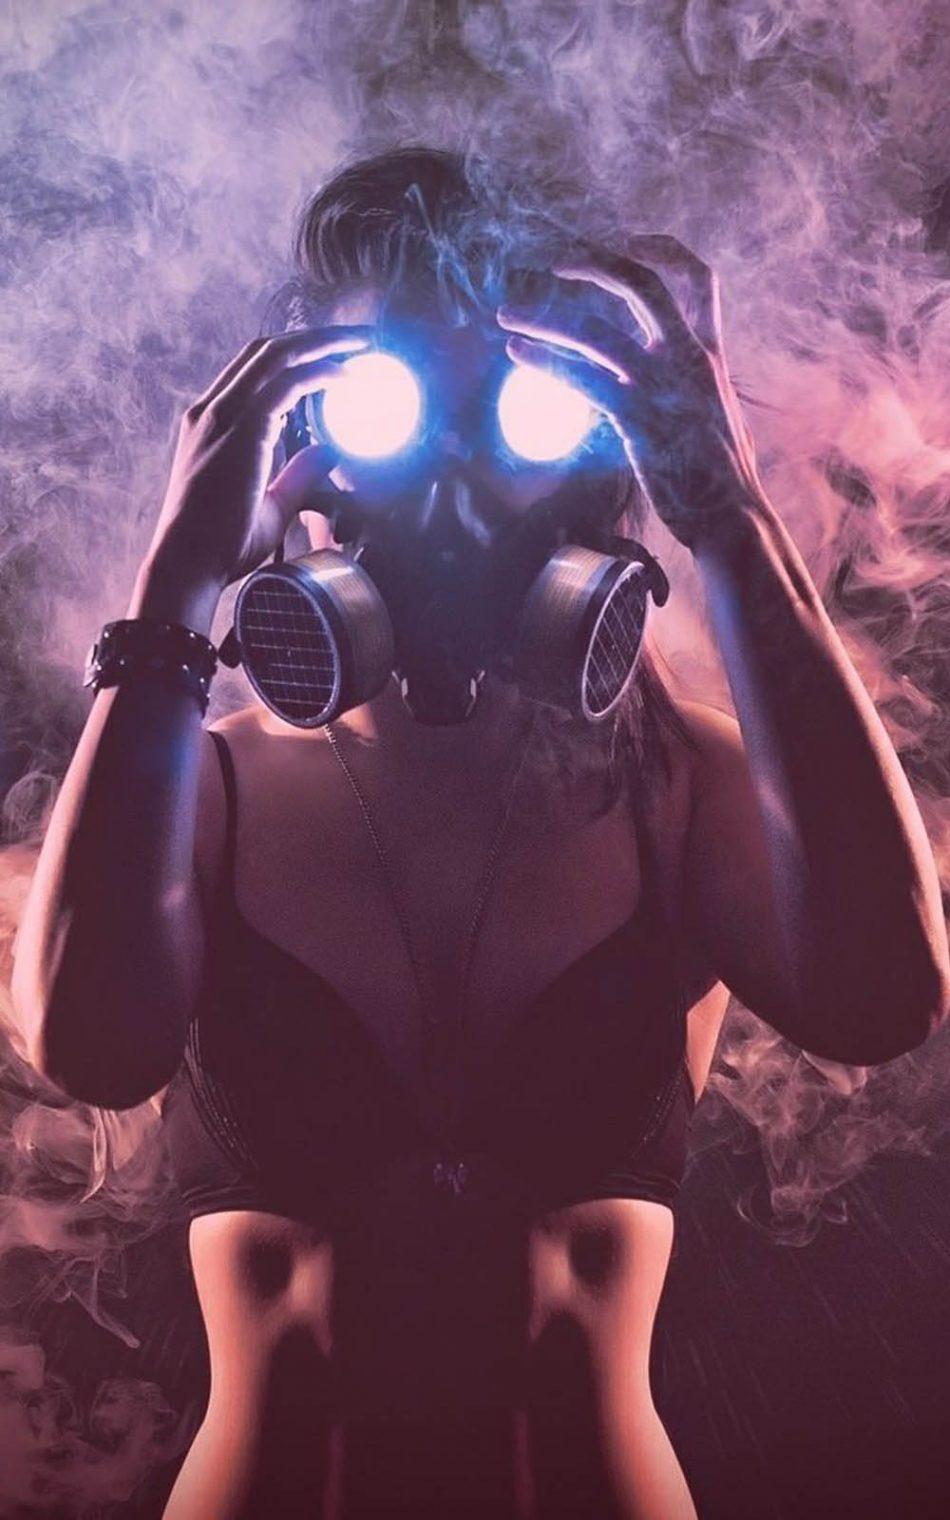 4k Gas Mask Wallpapers Top Free 4k Gas Mask Backgrounds Wallpaperaccess 5116